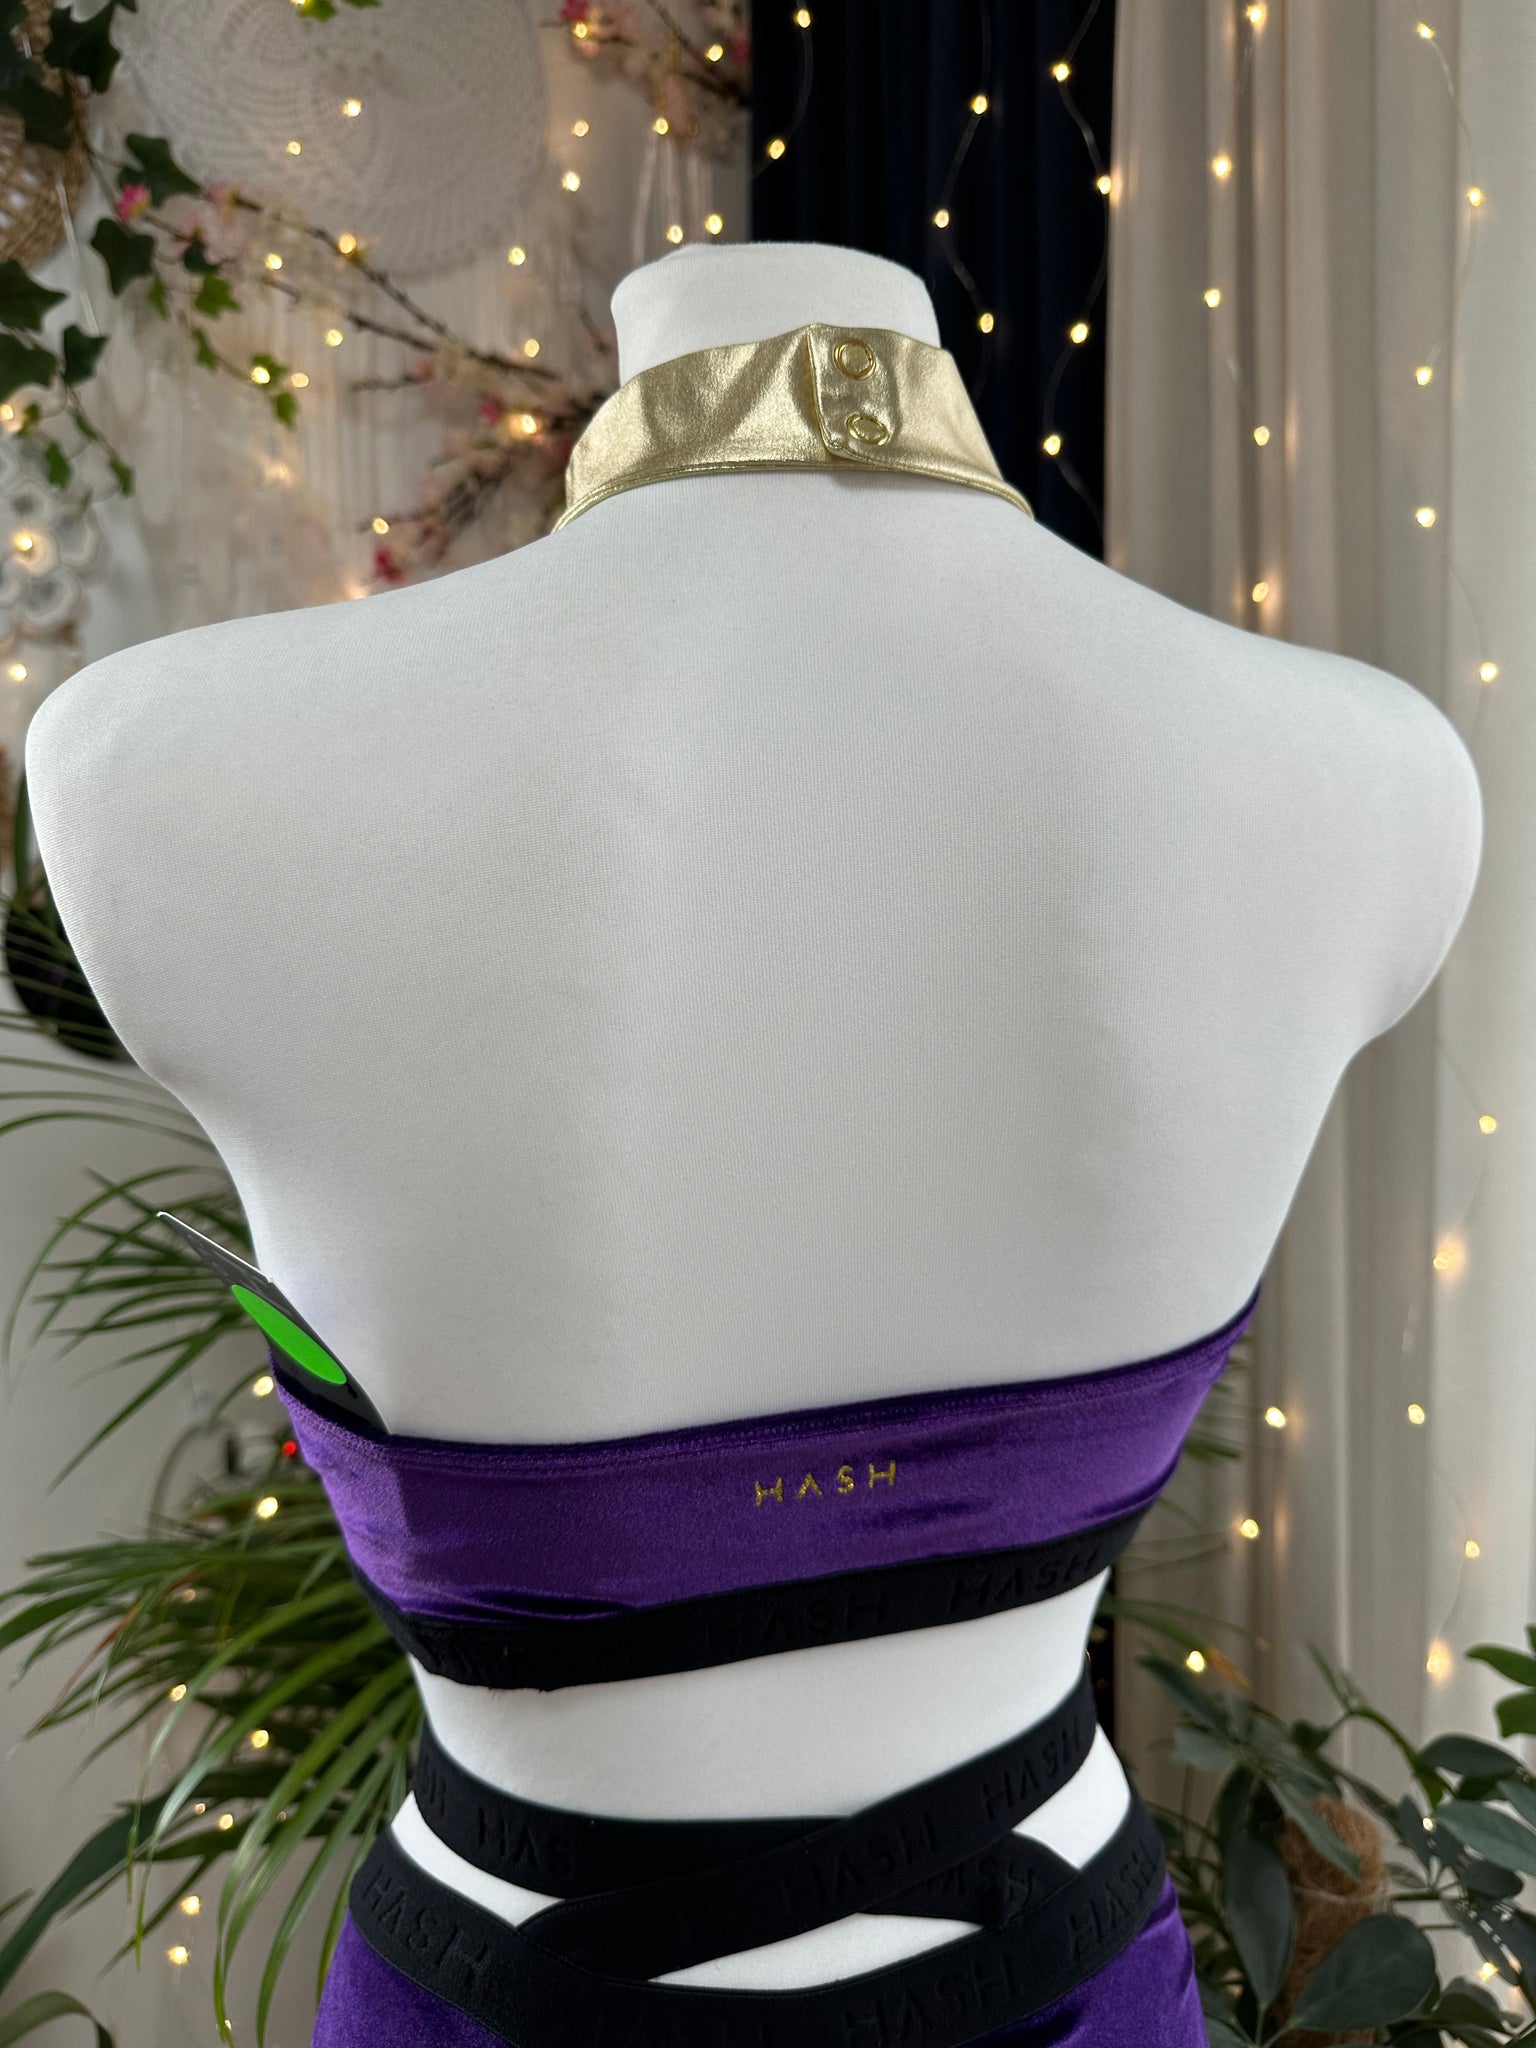 TOP POSH DARK PURPLE WITH GOLD OUTLET -35%